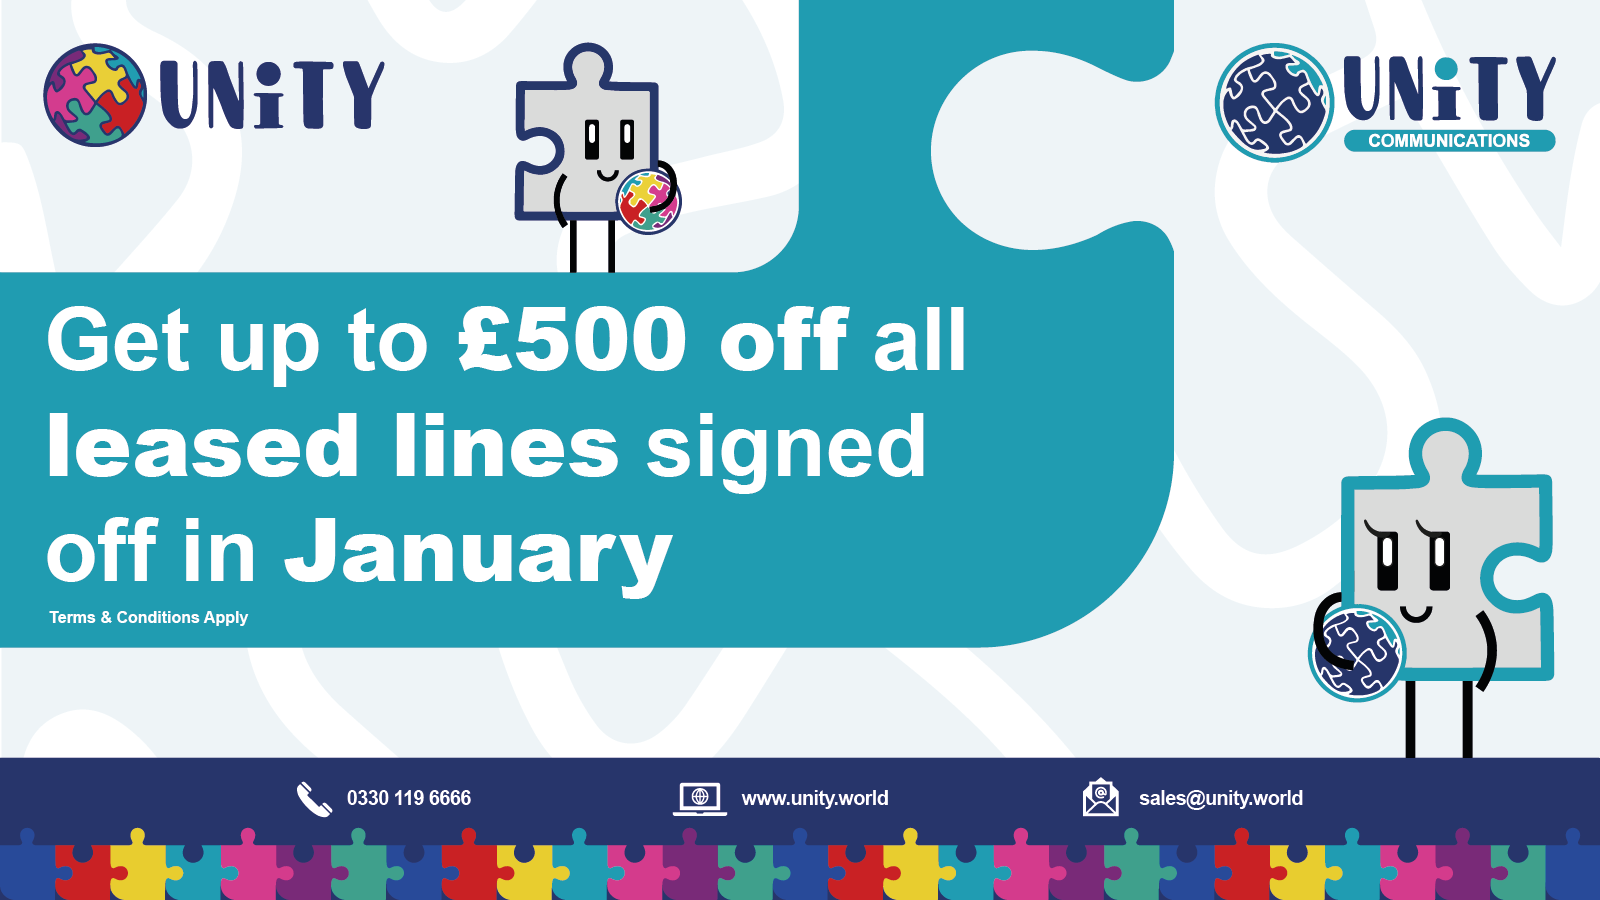 Get up to £500 off all leased lines signed off in January with Unity 